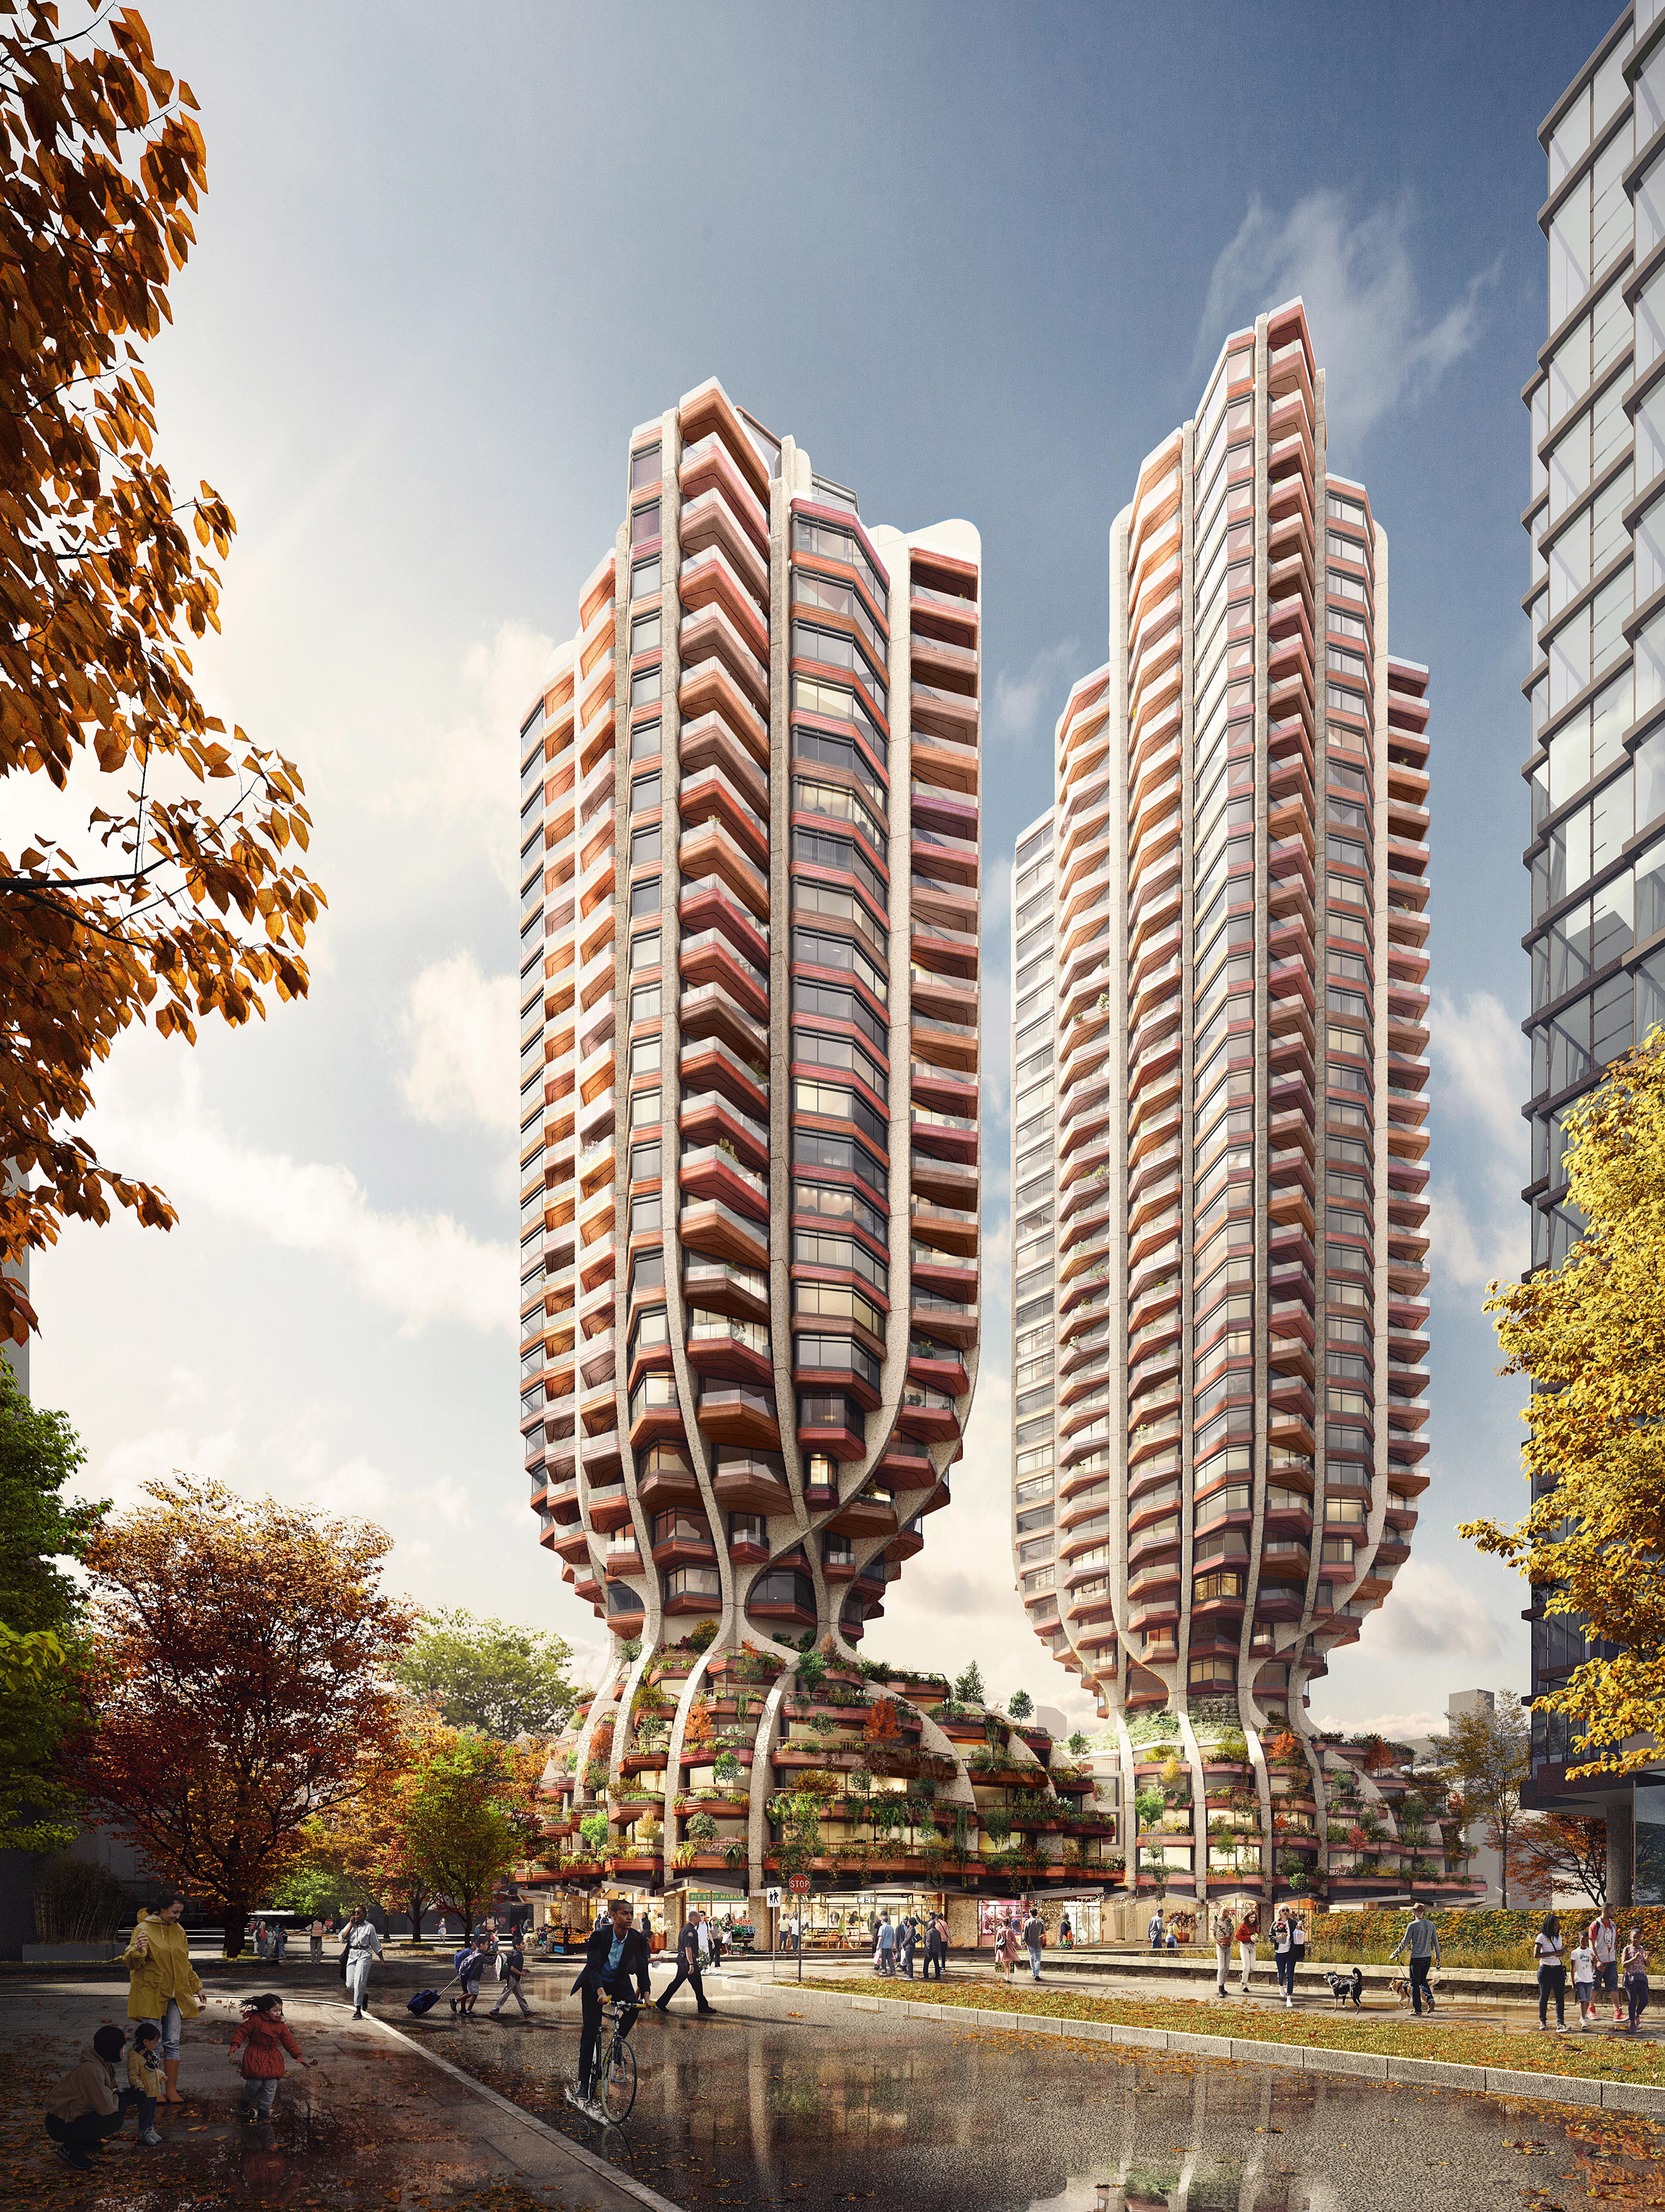 British architecture and design firm Heatherwick Studio has unveiled visuals of a pair of residential skyscrapers planned for Vancouver, Canada. 2021